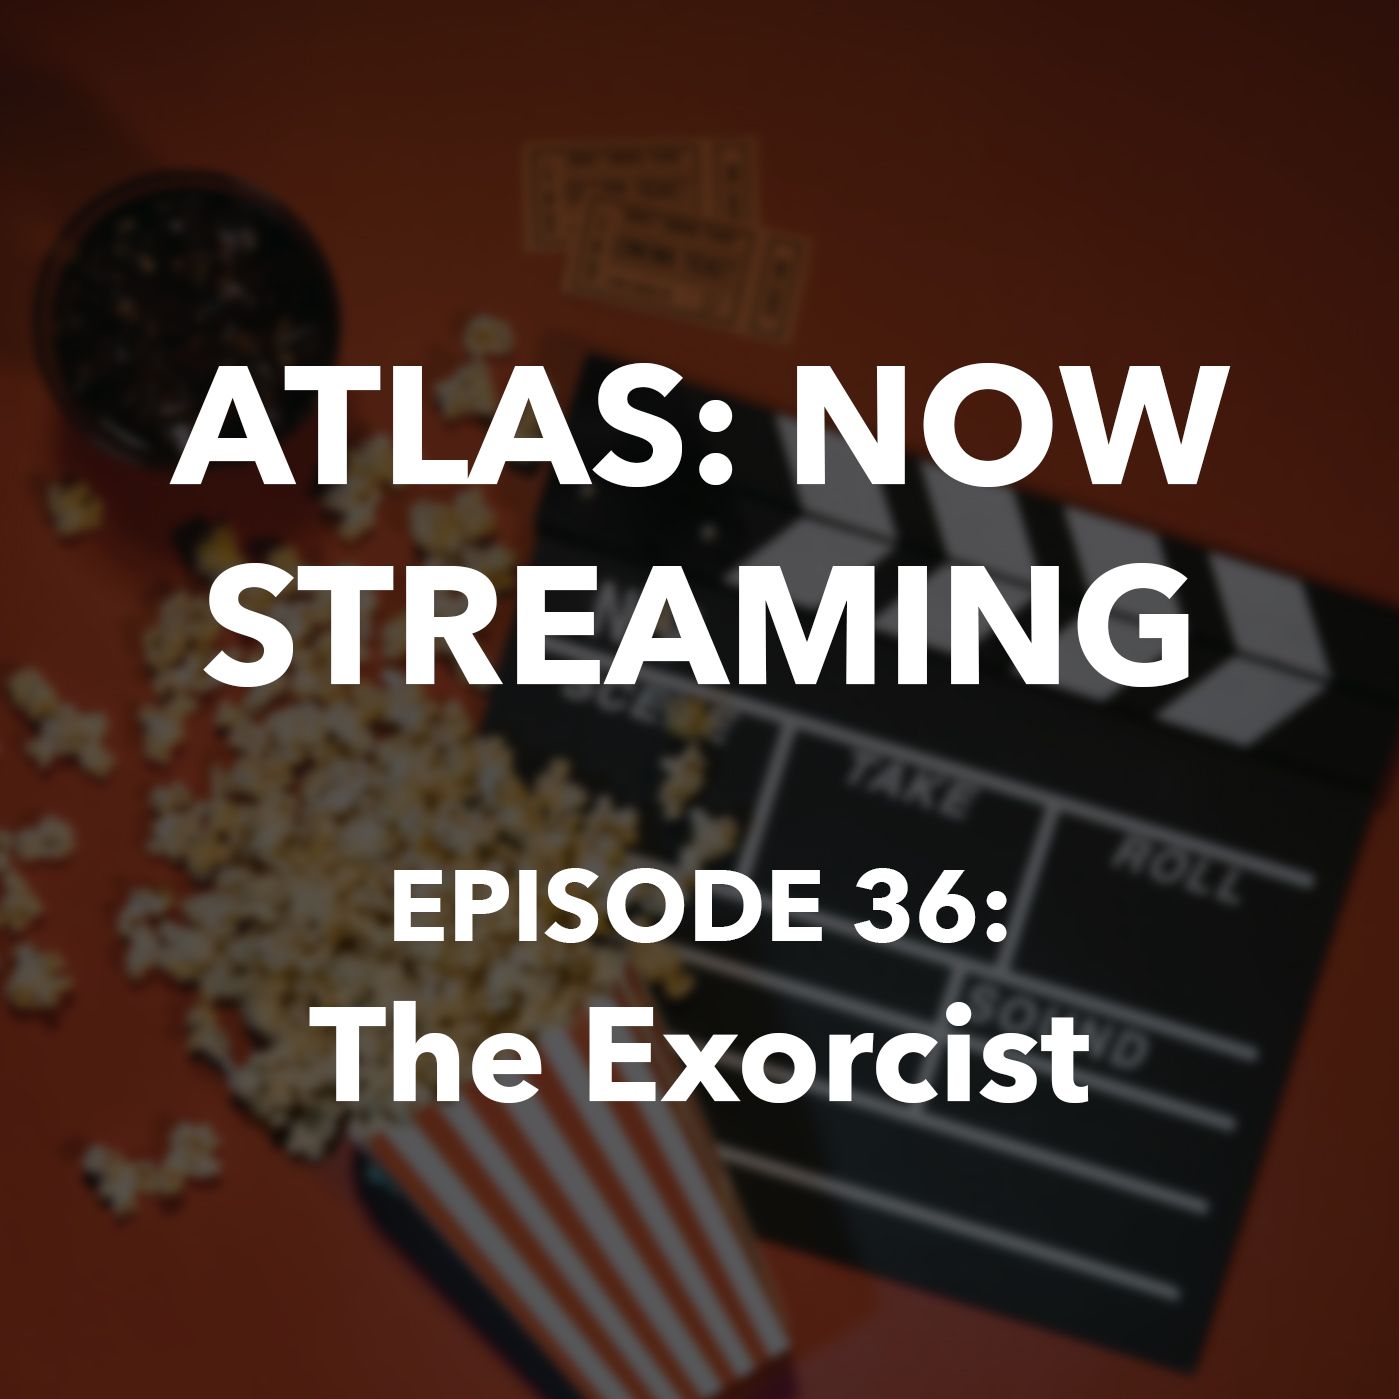 The Exorcist - Classic Horror Movies - Atlas: Now Streaming Episode 36